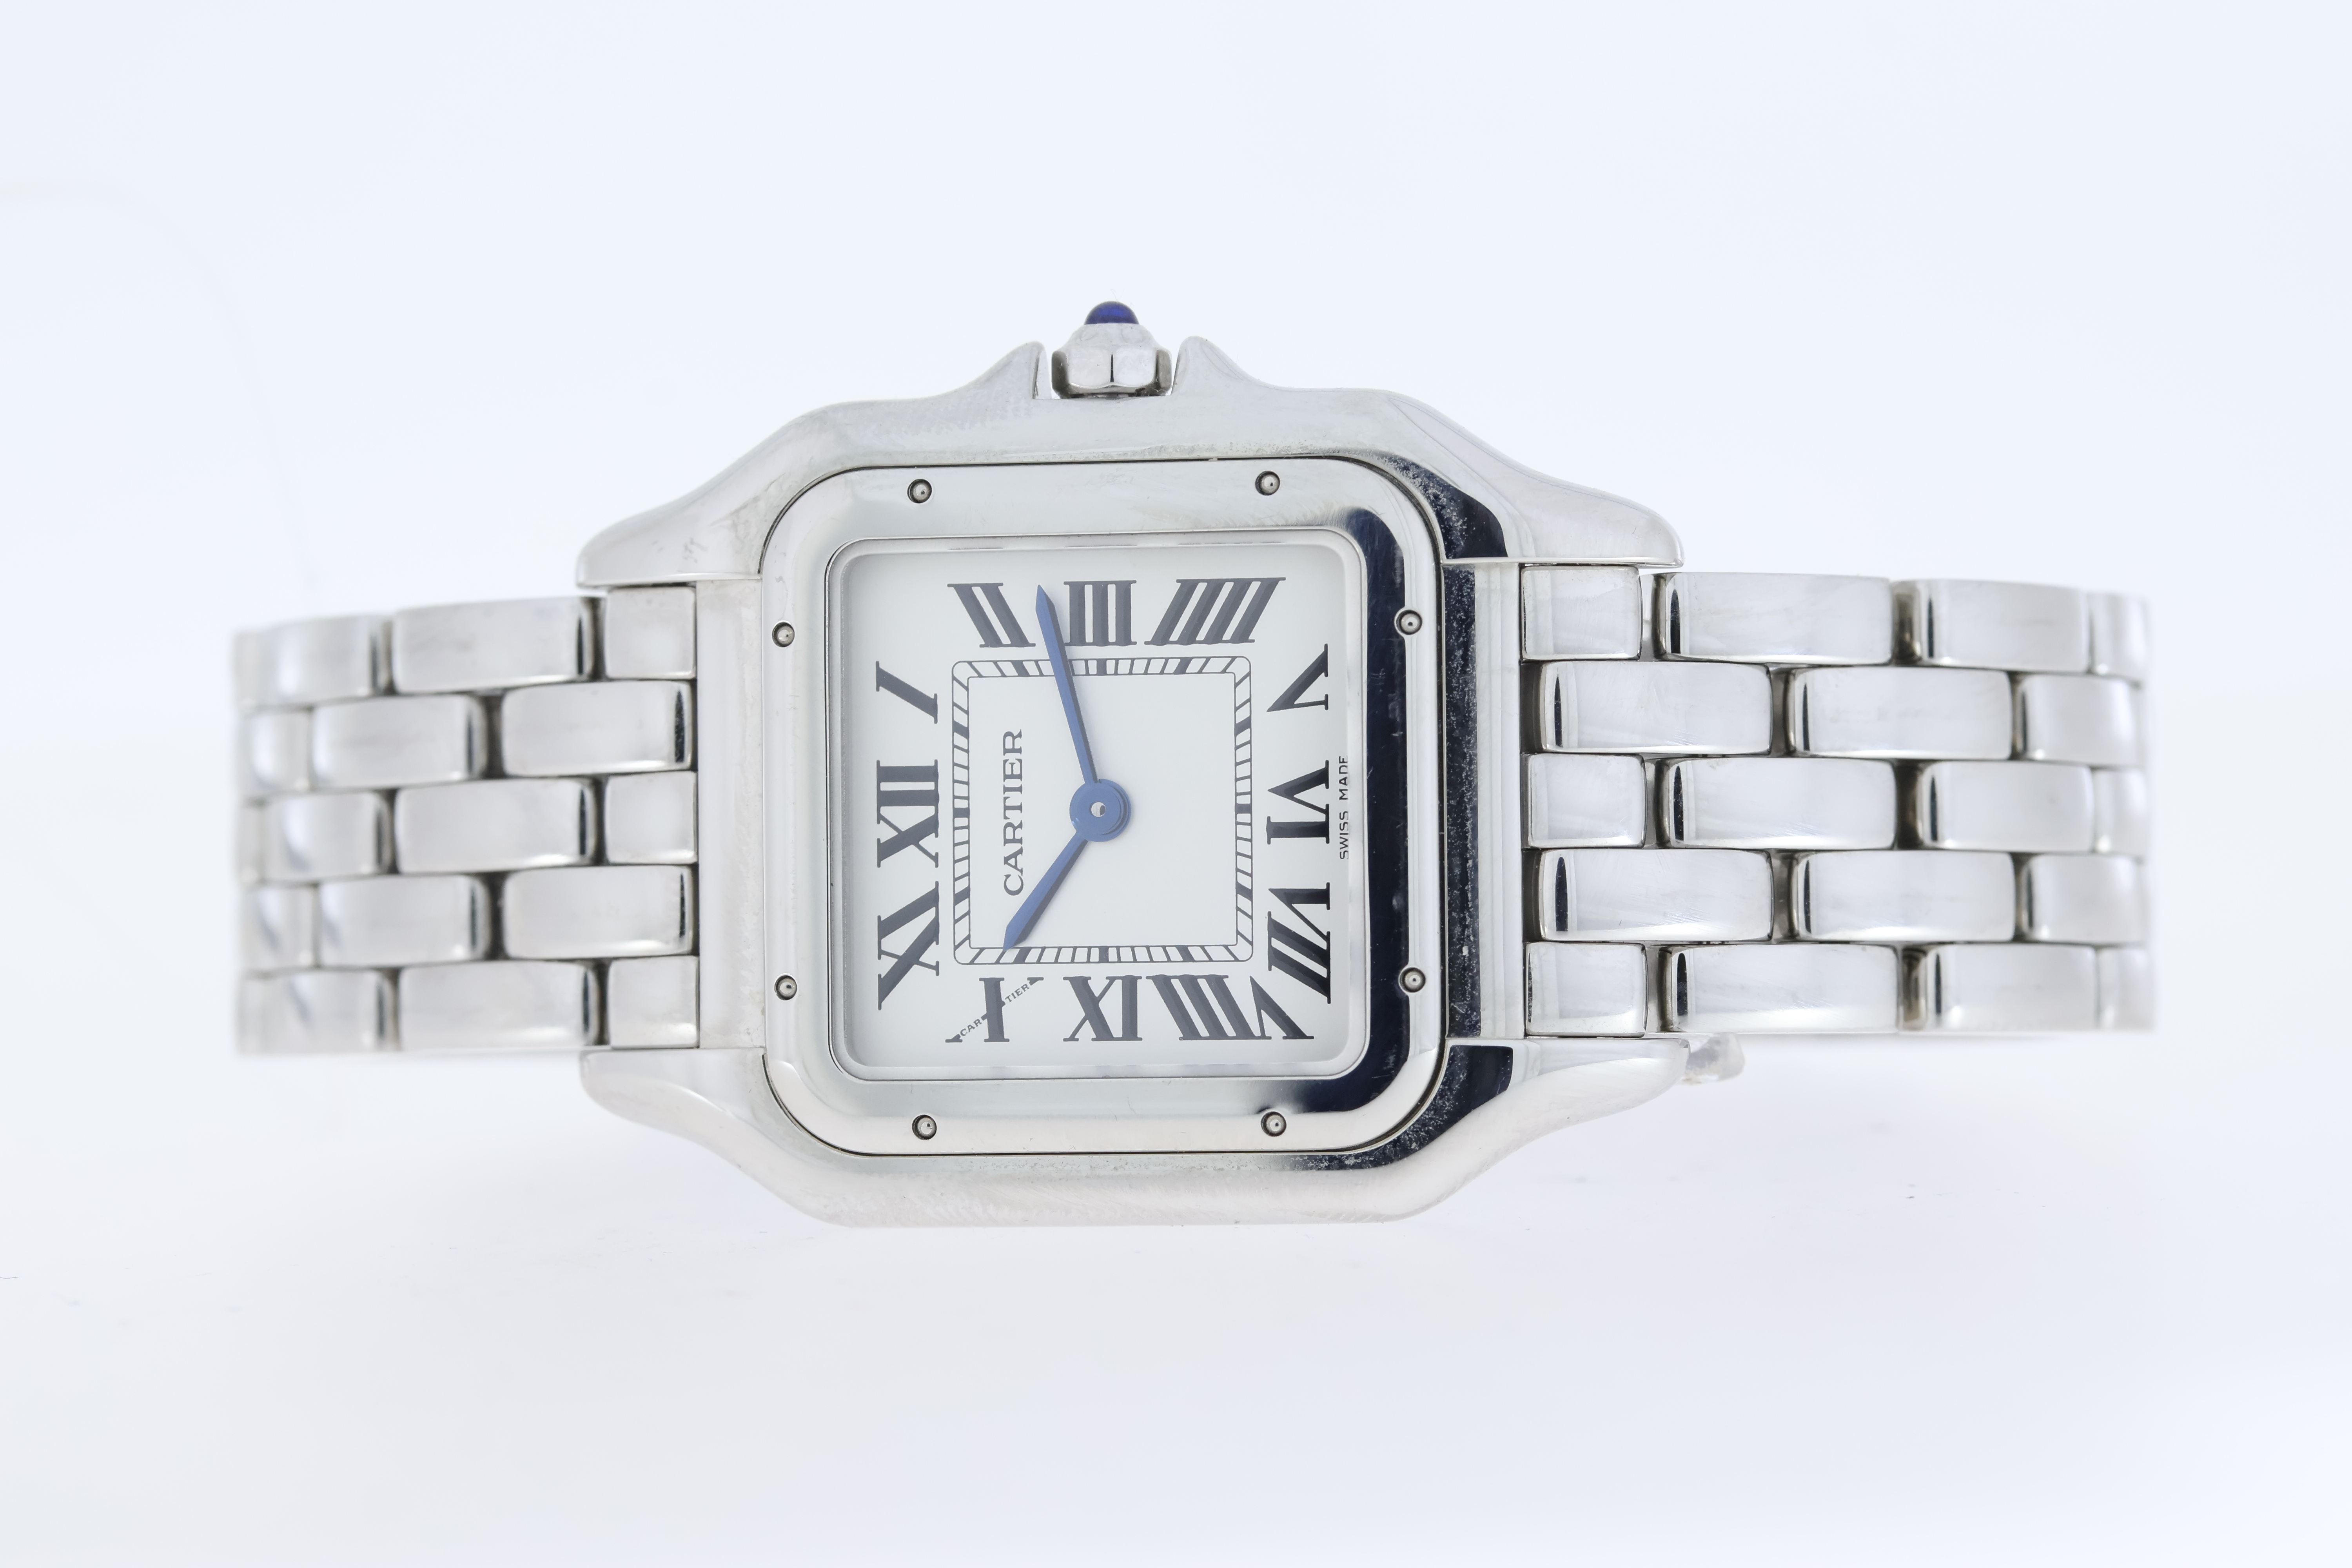 Cartier Panthere Reference 4016 Quartz - Image 3 of 6